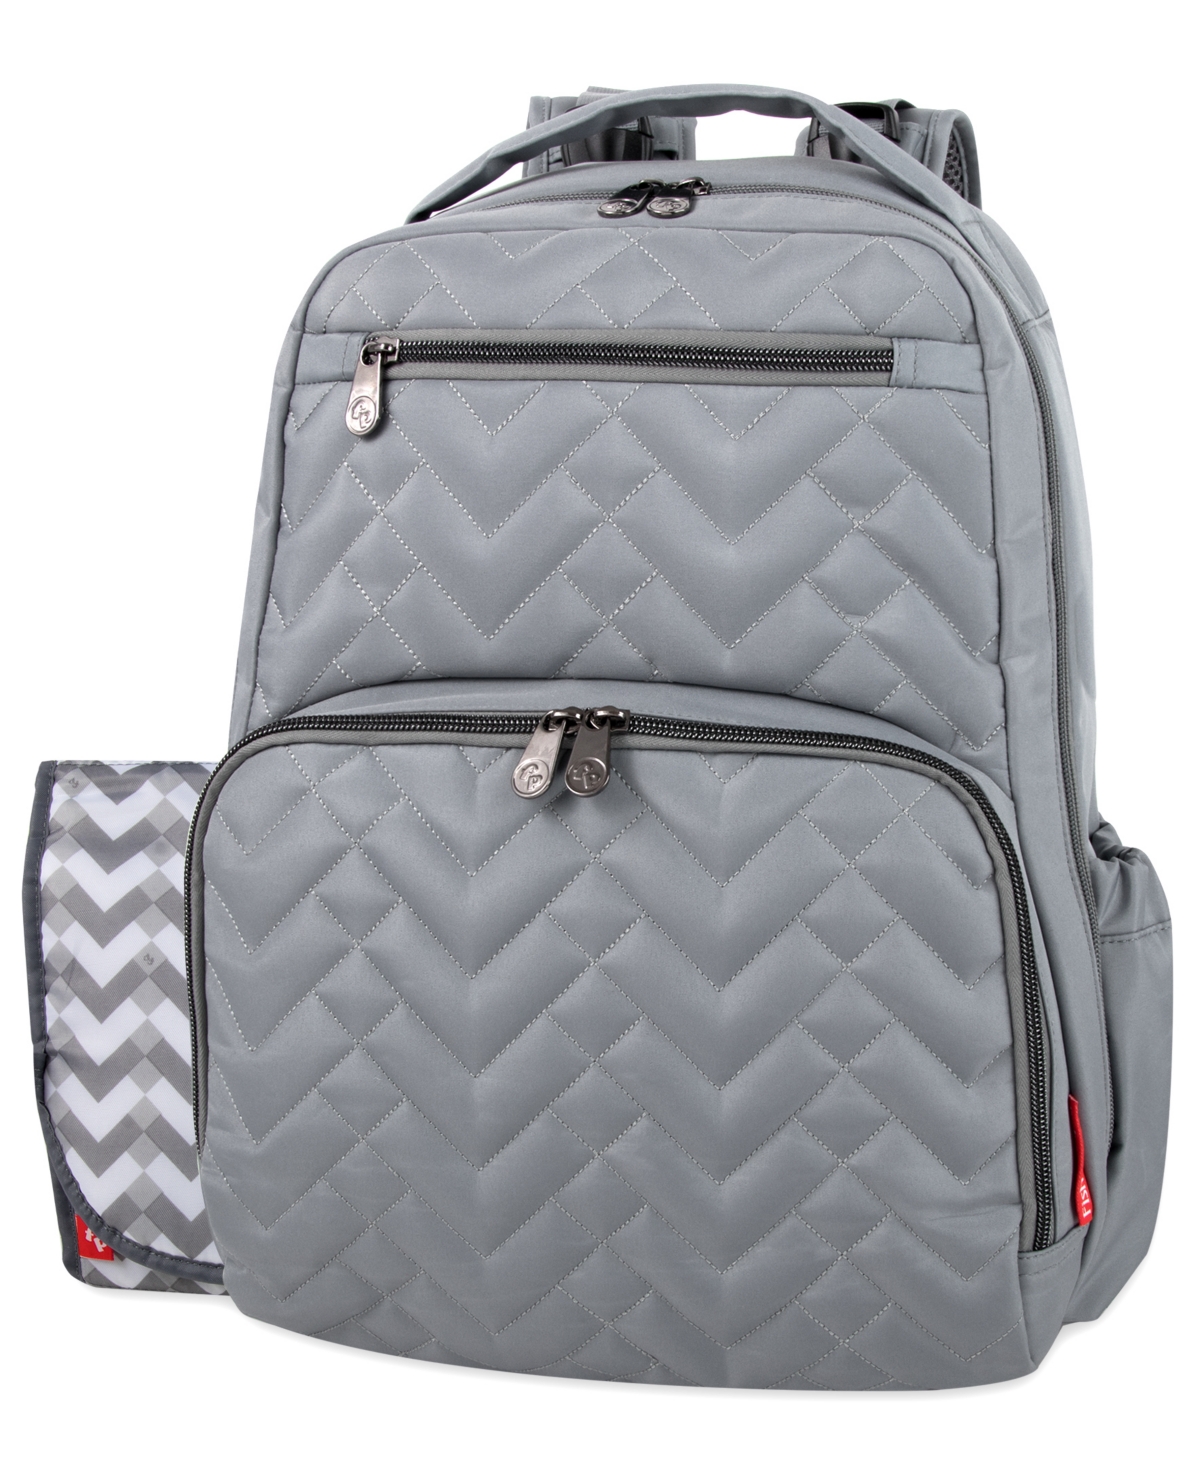 Fisher Price Signature Quilt Diaper Backpack In Dark Gray